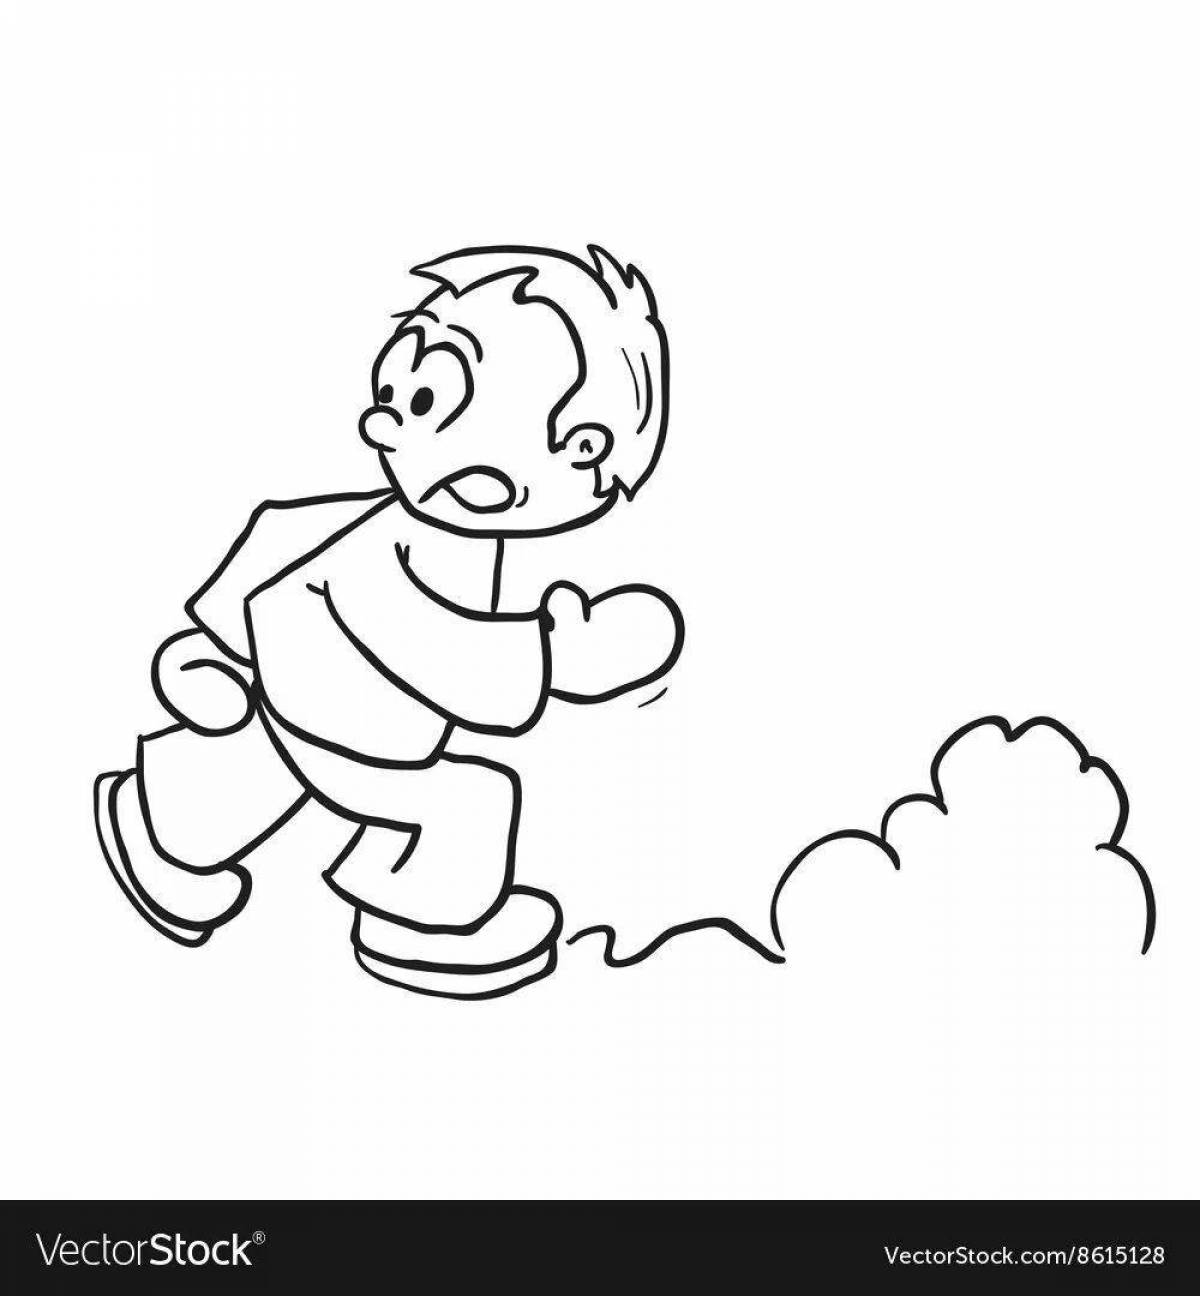 Running boy coloring page